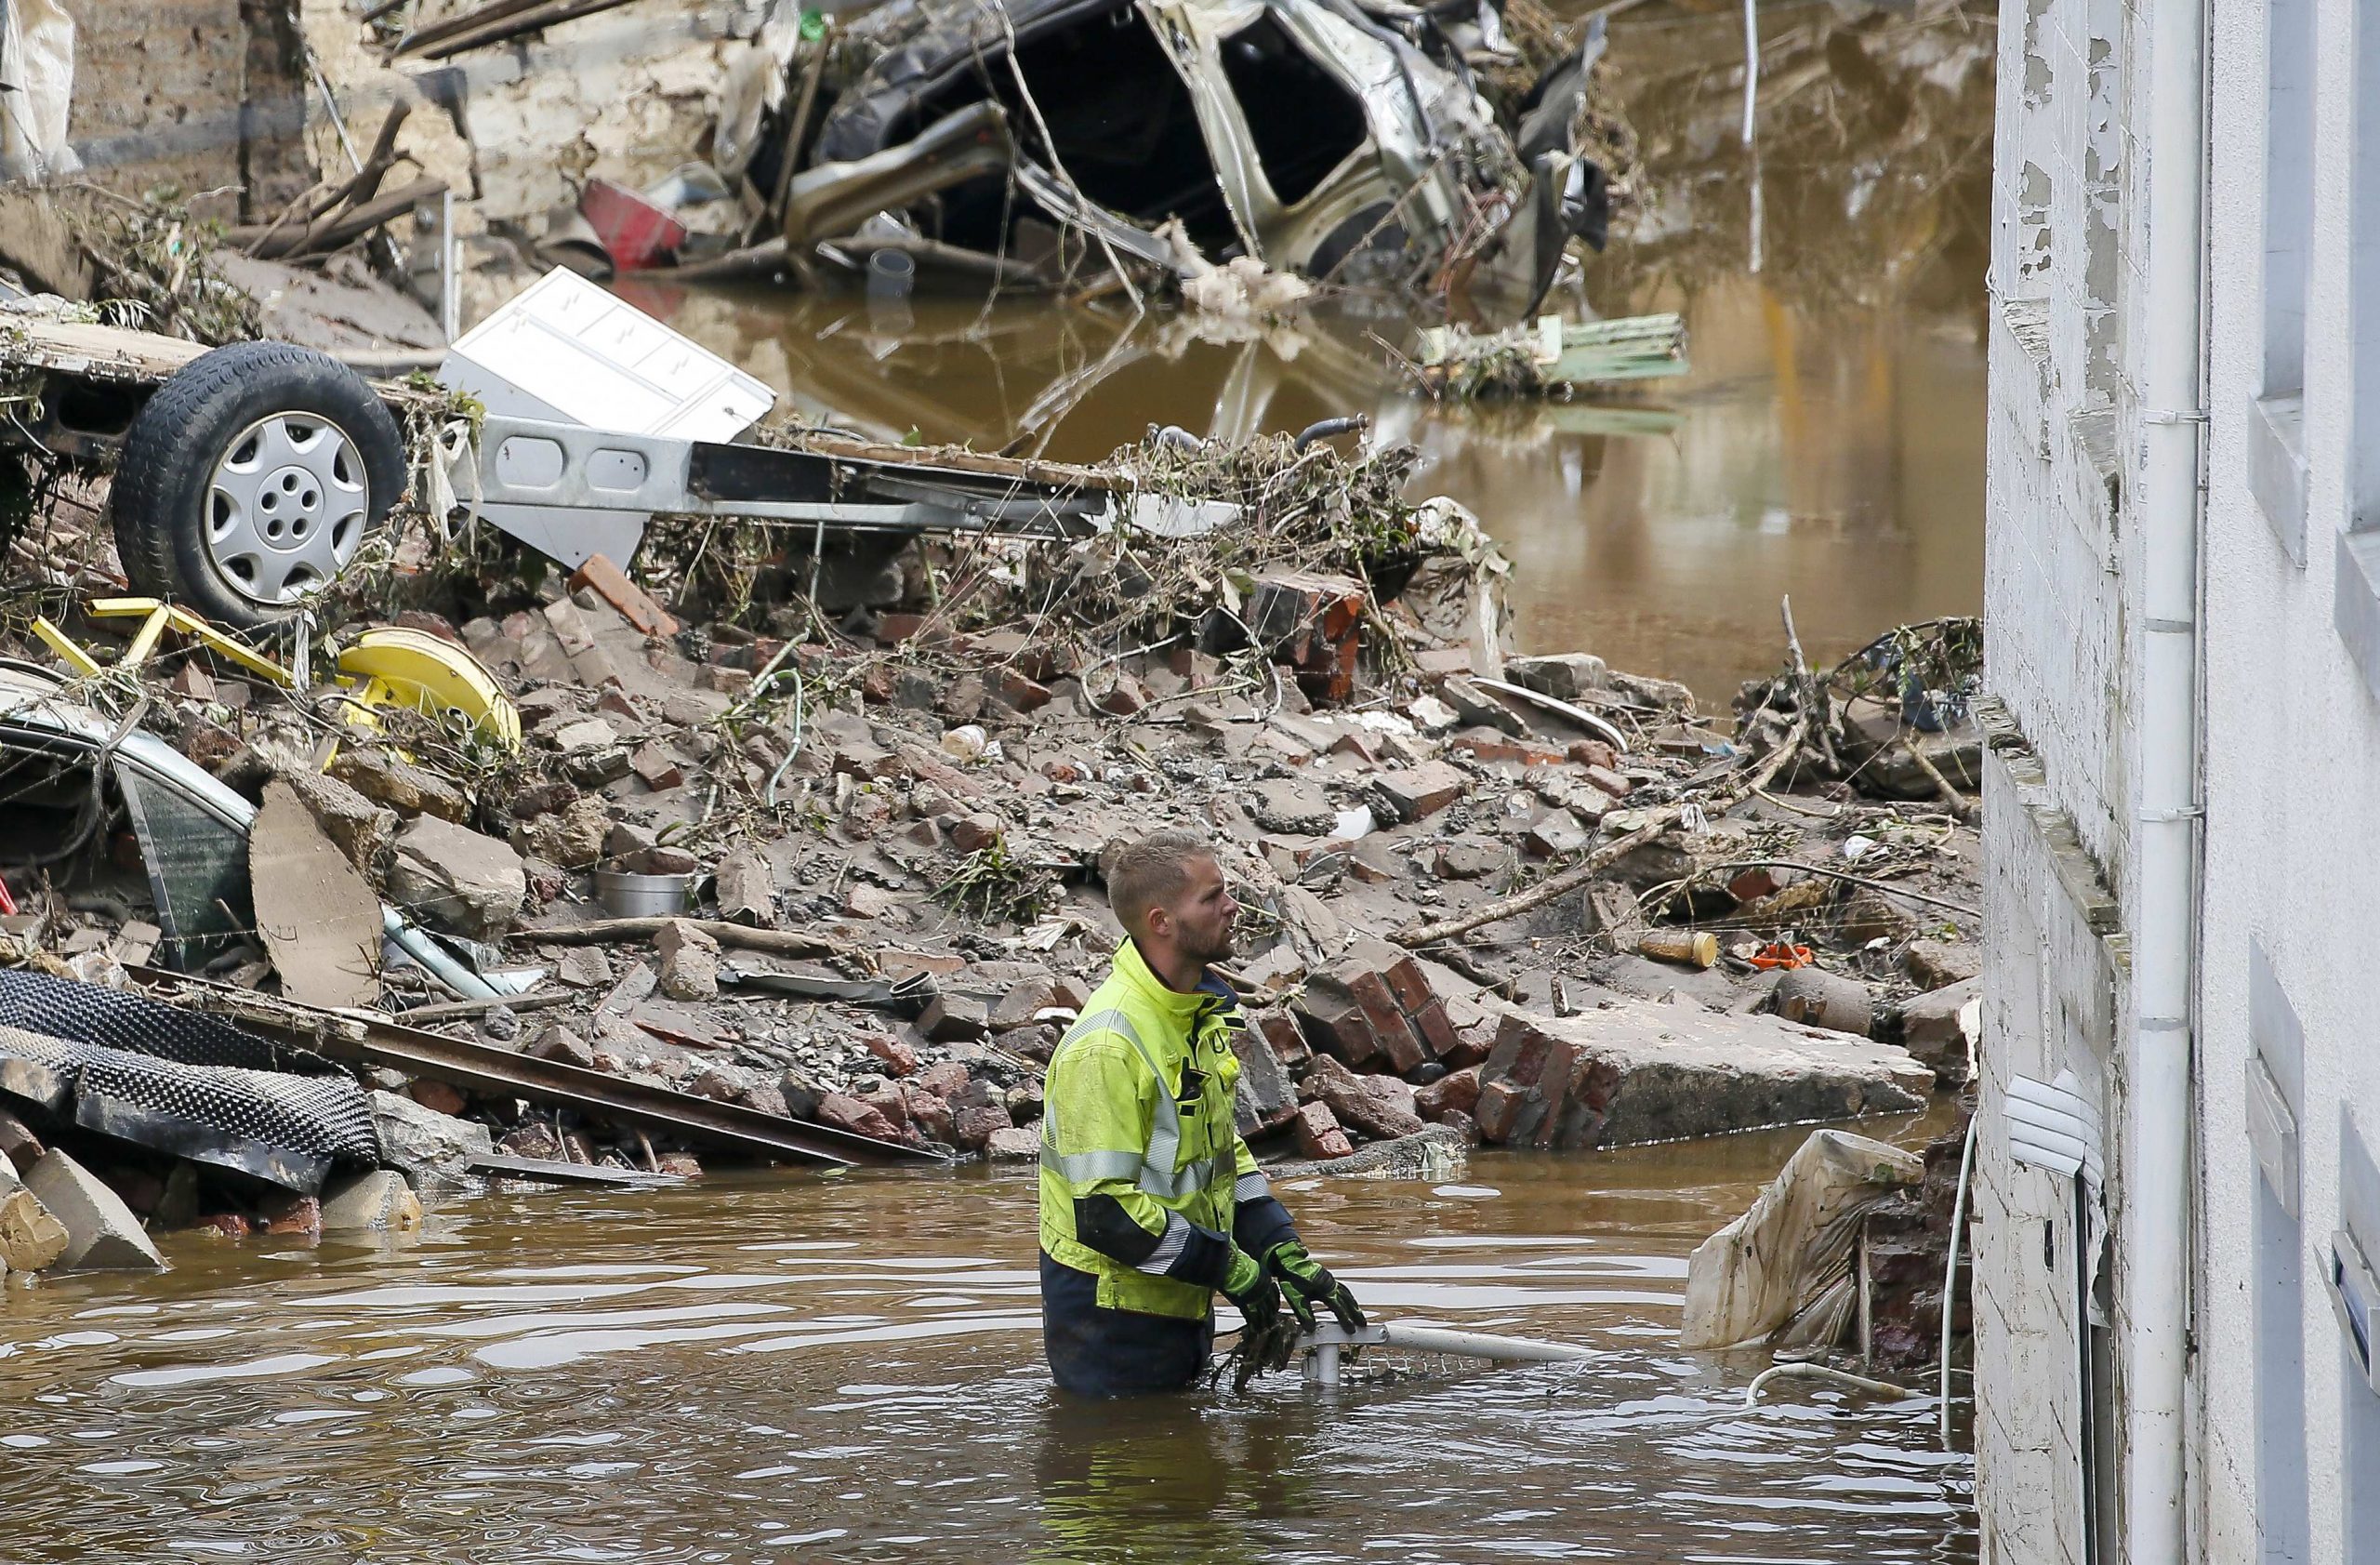 epa09350108 Rescue forces among  the debris after heavy rains caused flooding in Pepinster, Belgium, 17 July 2021. Heavy rains have caused widespread damage and flooding in parts of Belgium.  EPA/JULIEN WARNAND